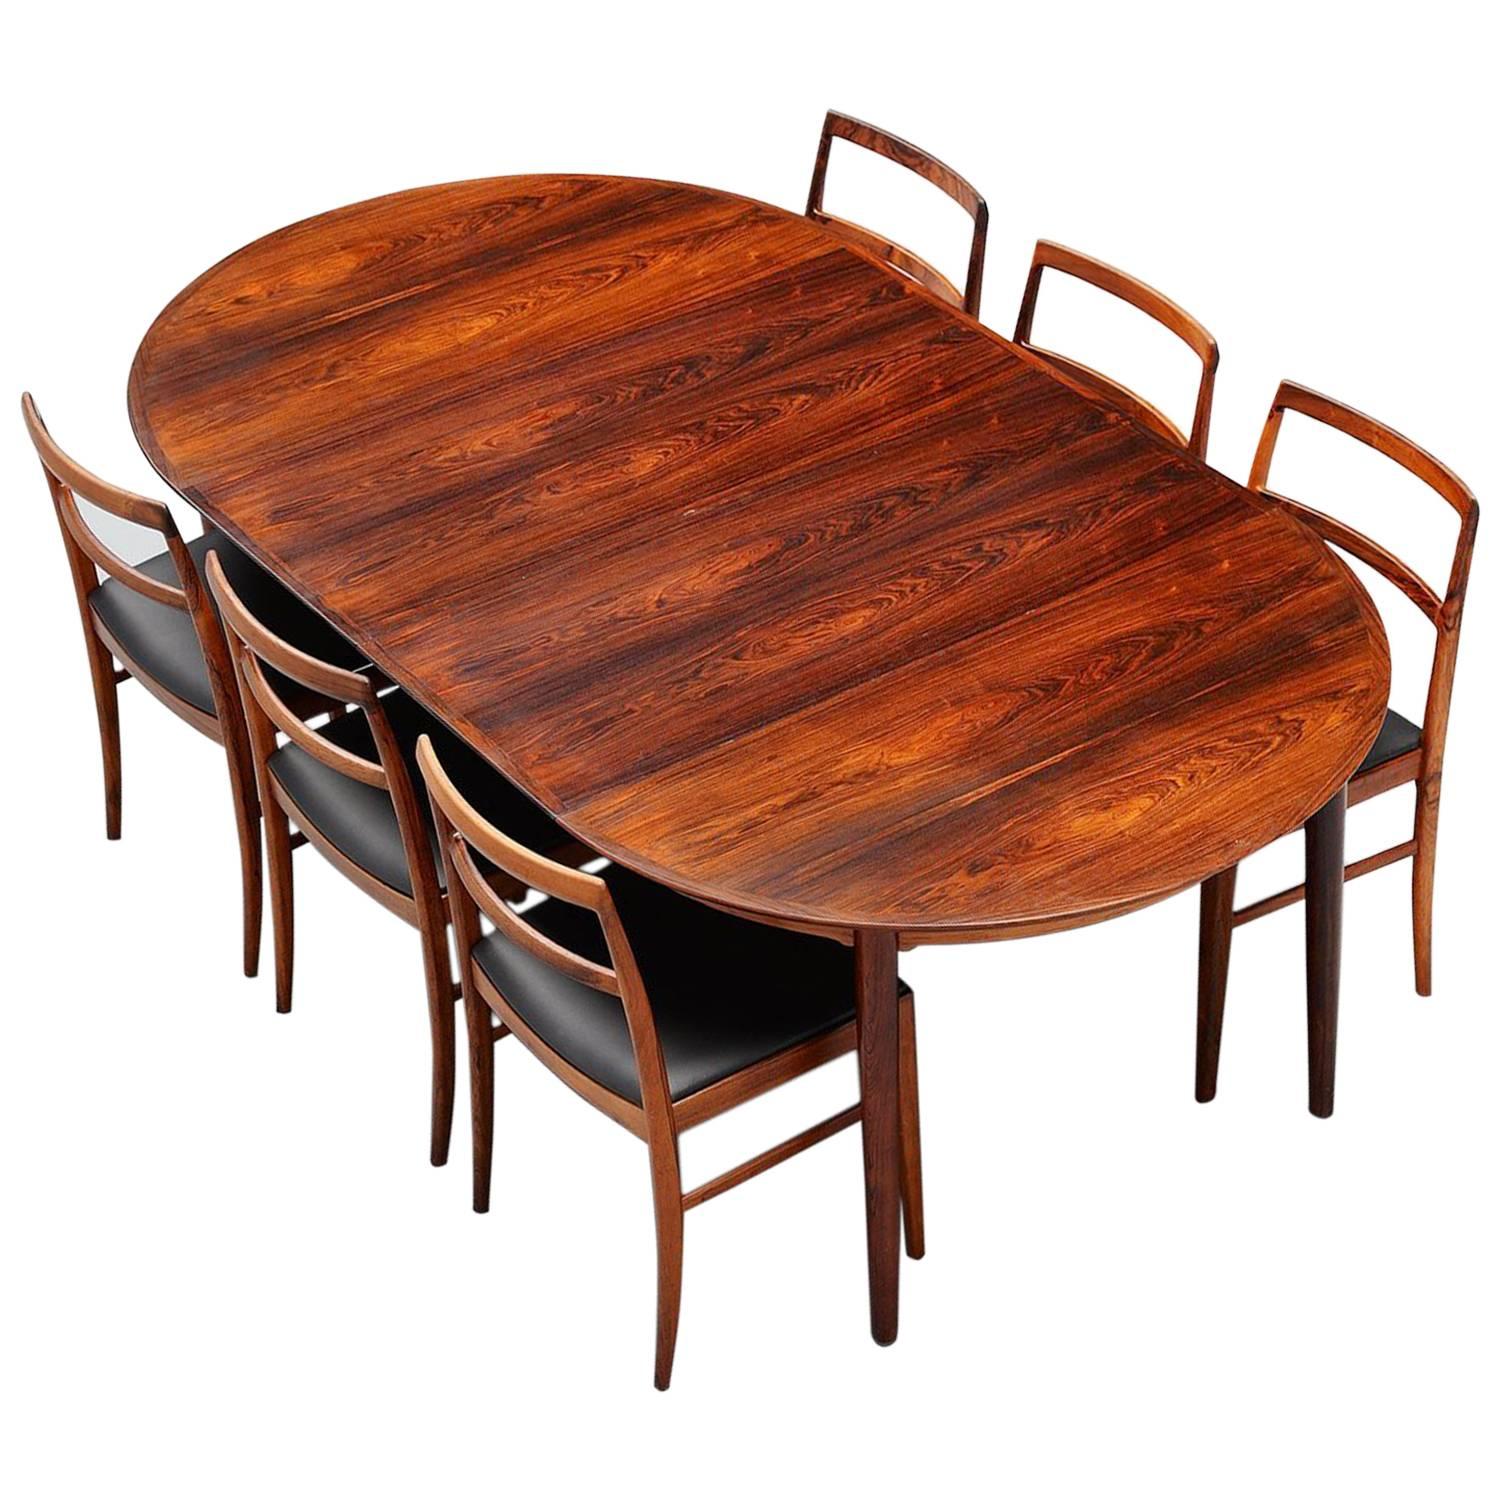 Very nice round to oval dining table designed by Arne Vodder for Sibast Mobler, Denmark, 1955. This table has two extension leaves so this goes from 120 cm diameter round, to 170 cm wide with one extension leave and to 230 cm wide with both